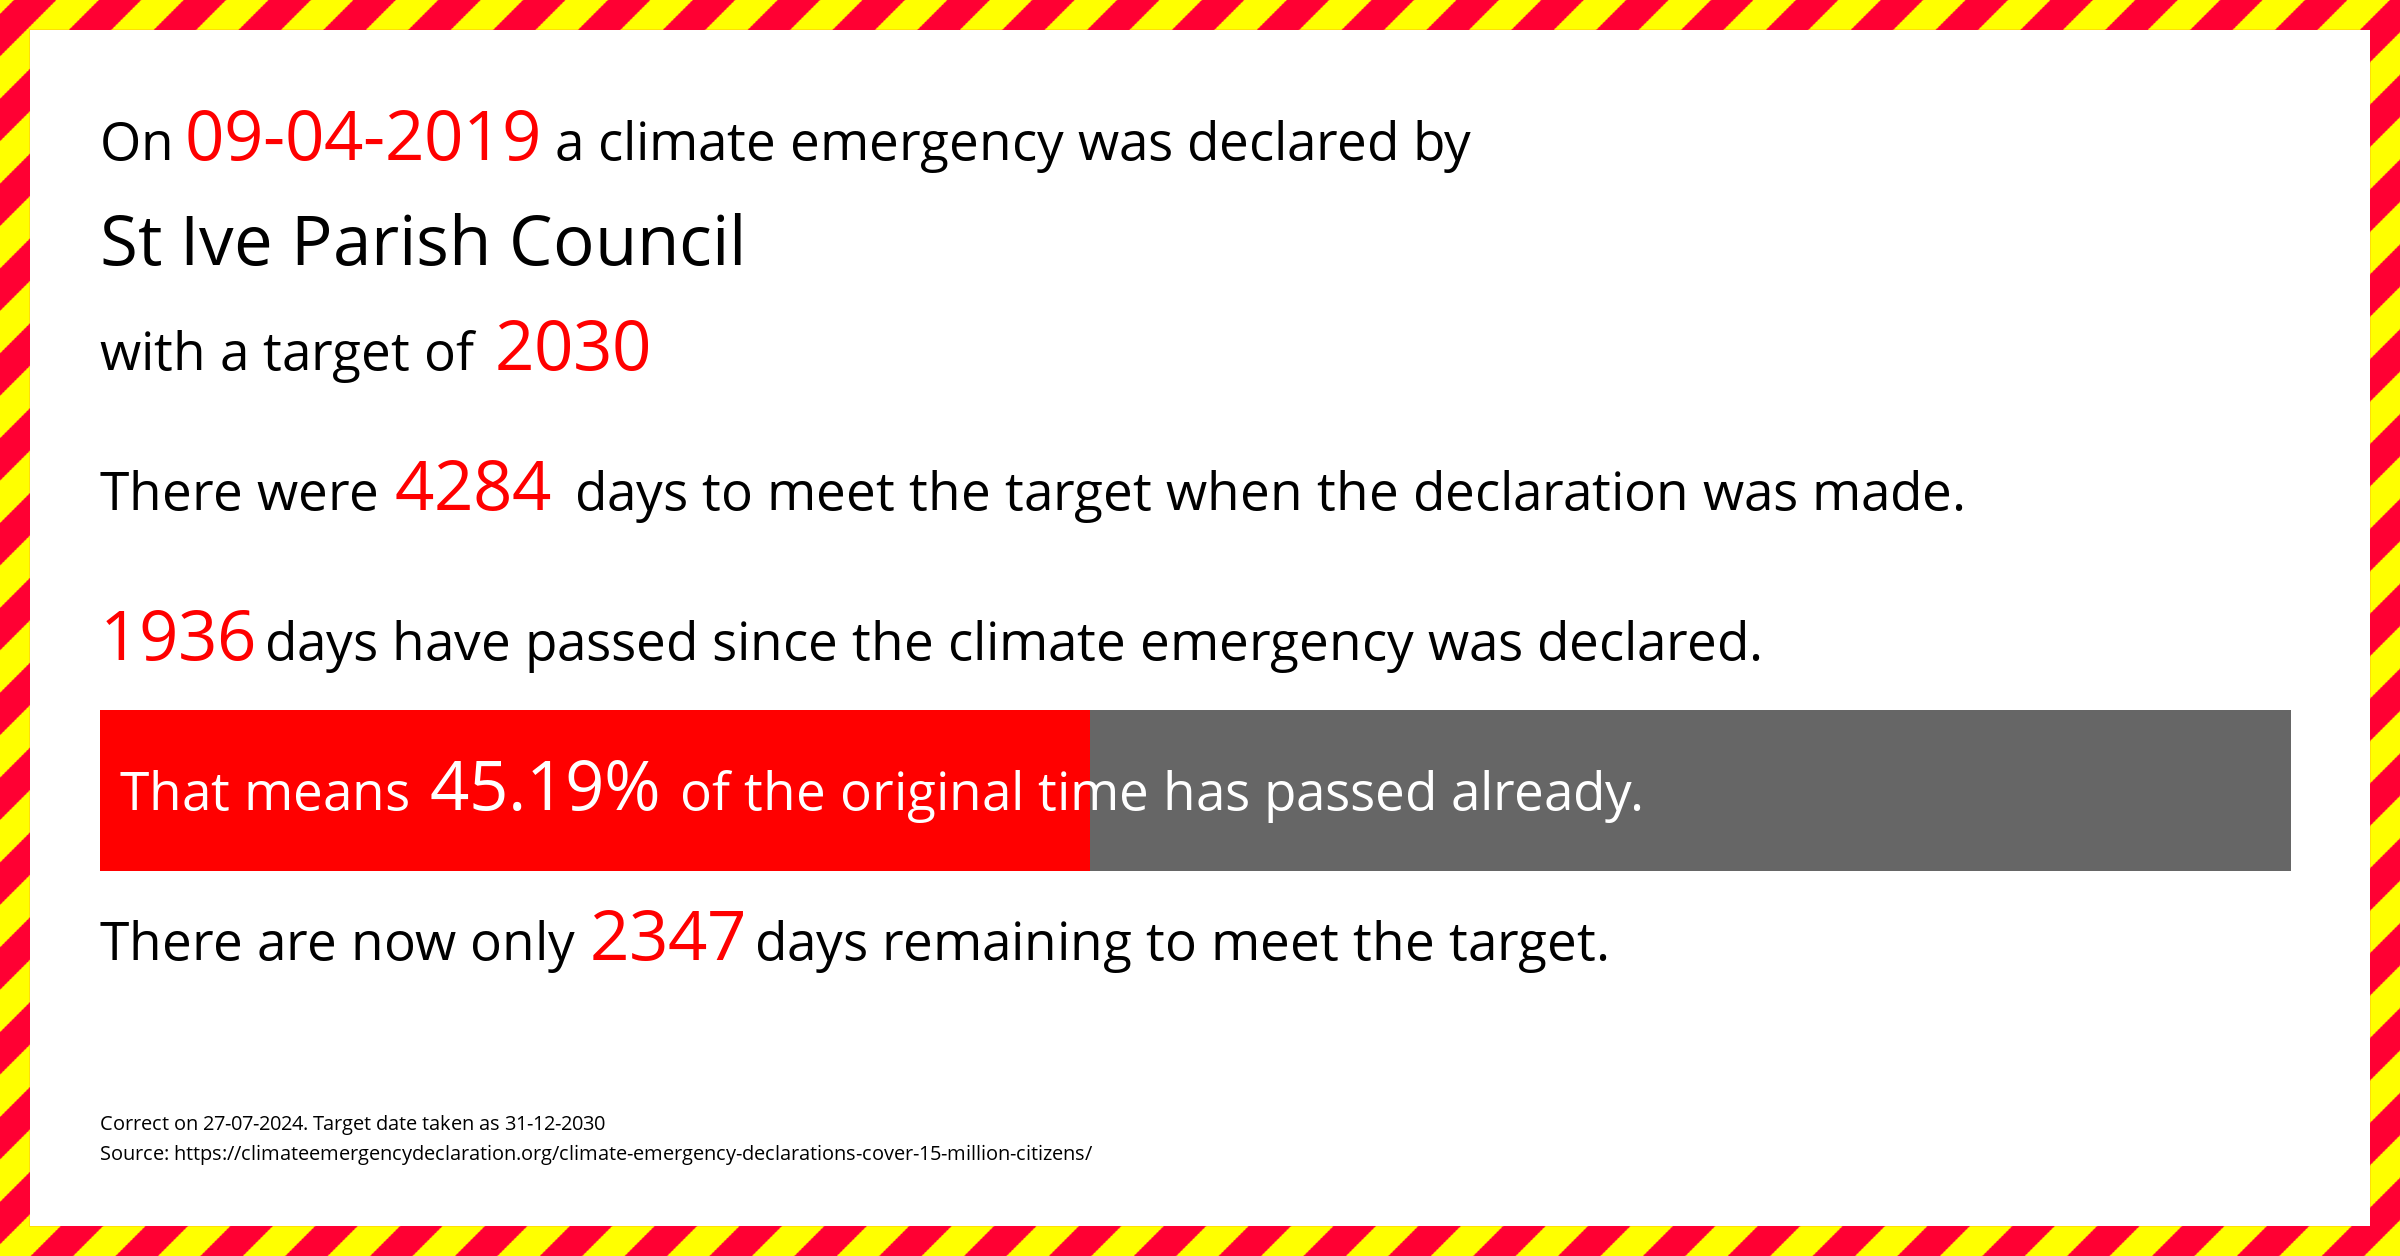 St Ive Parish Council declared a Climate emergency on Tuesday 9th April 2019, with a target of 2030.